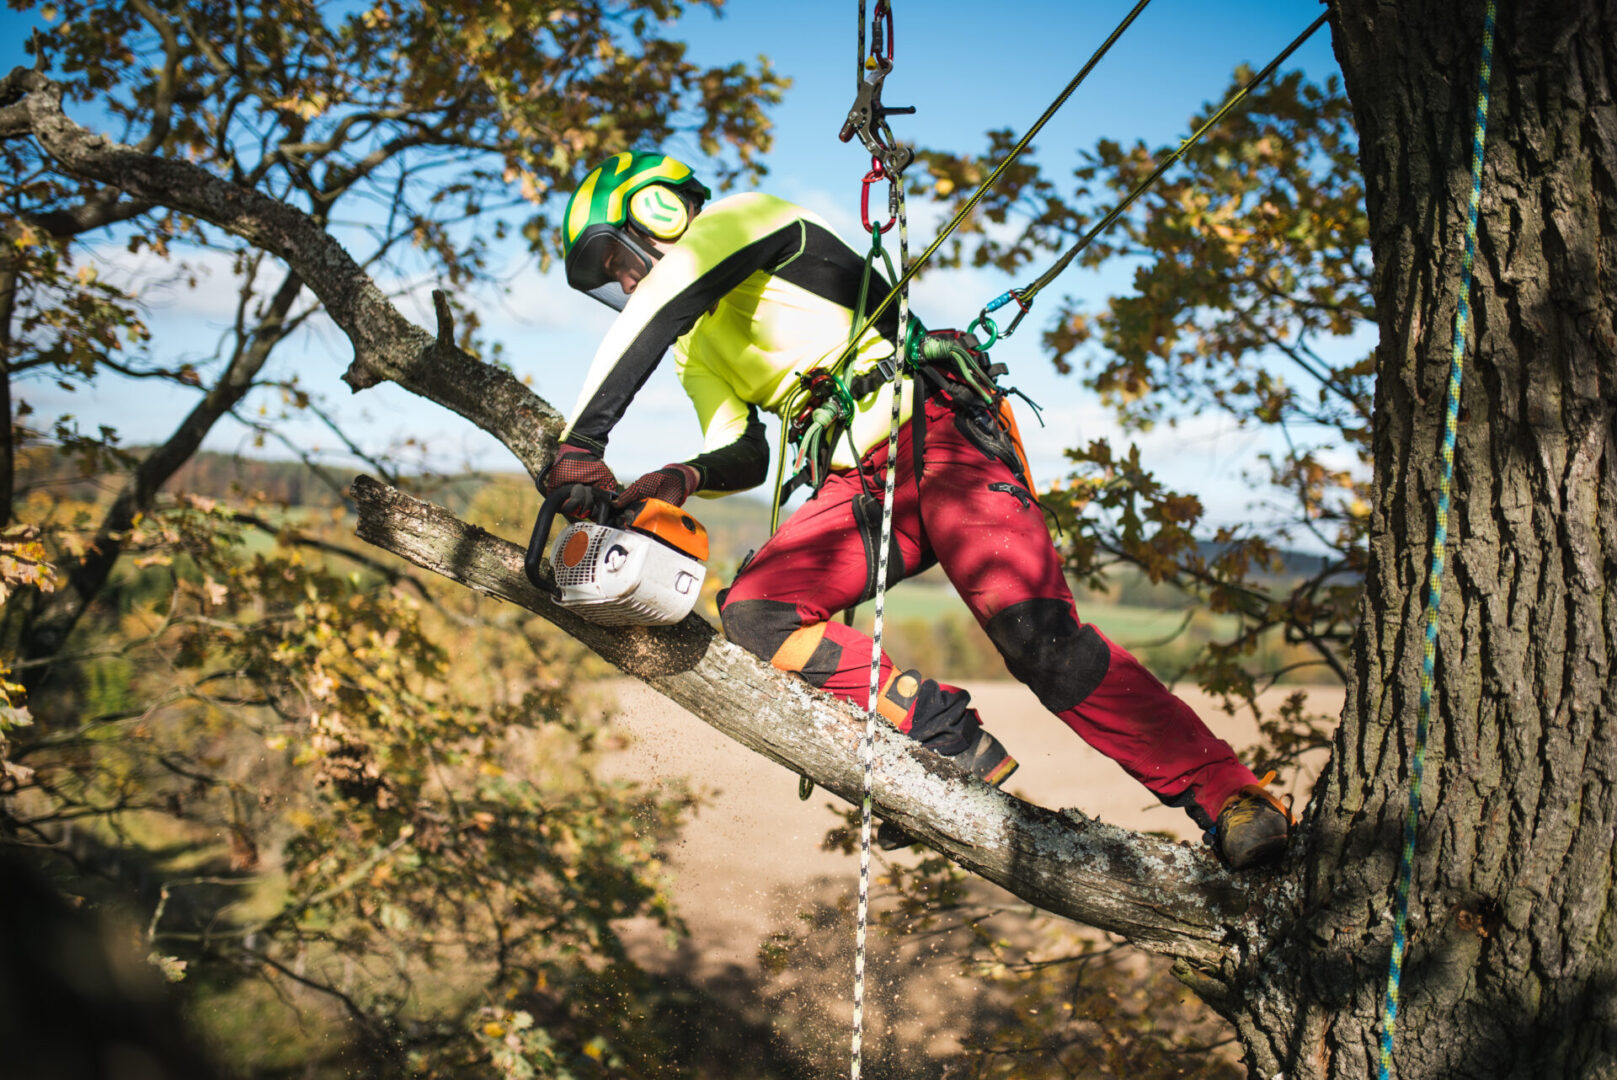 Arborist Safe Work Practices | Protect Your Arborists on the Job